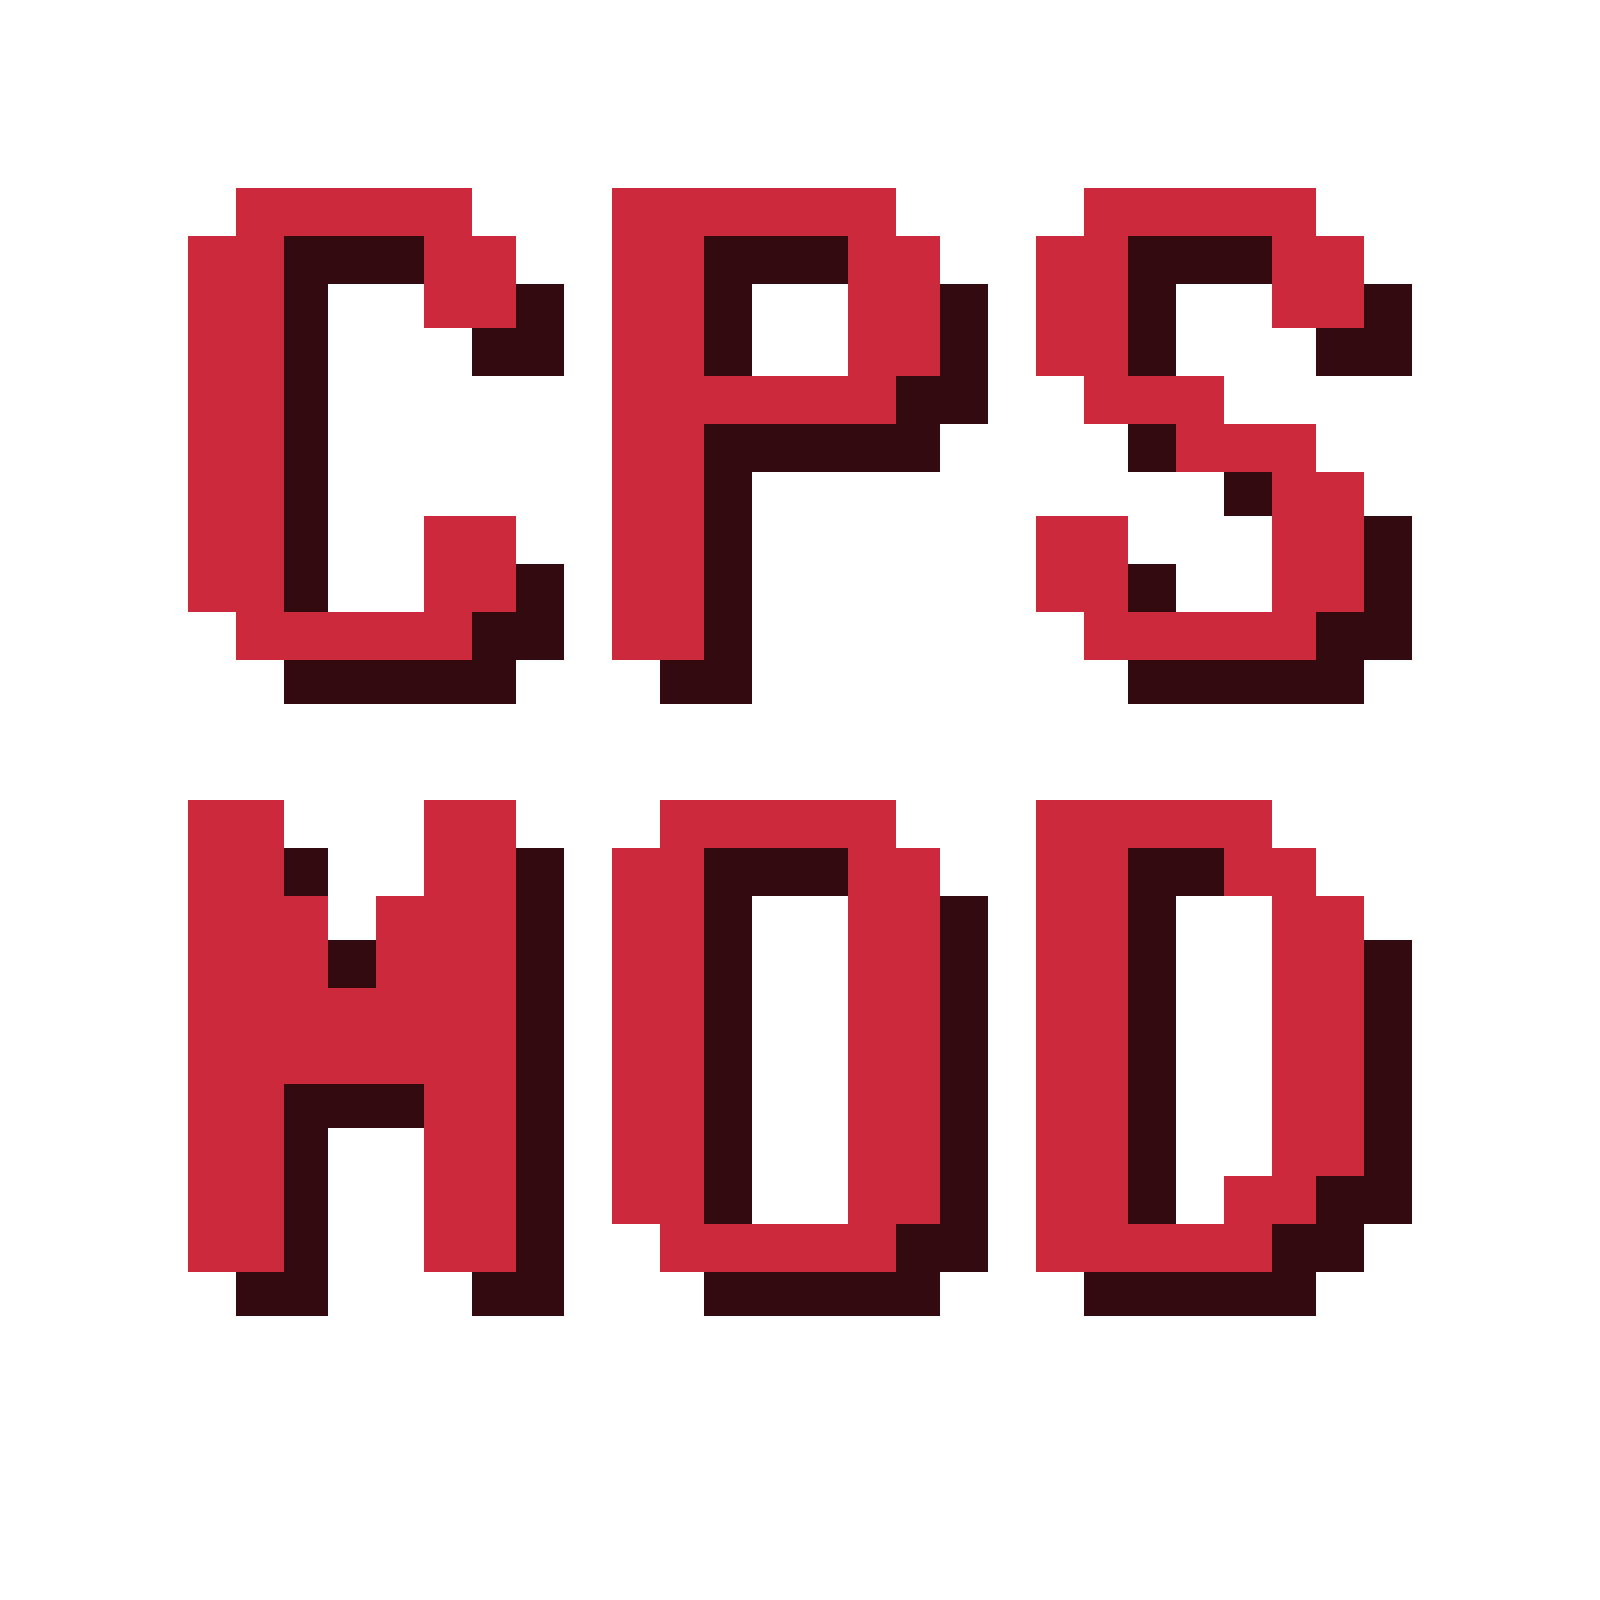 How to perform a CPS test in Minecraft